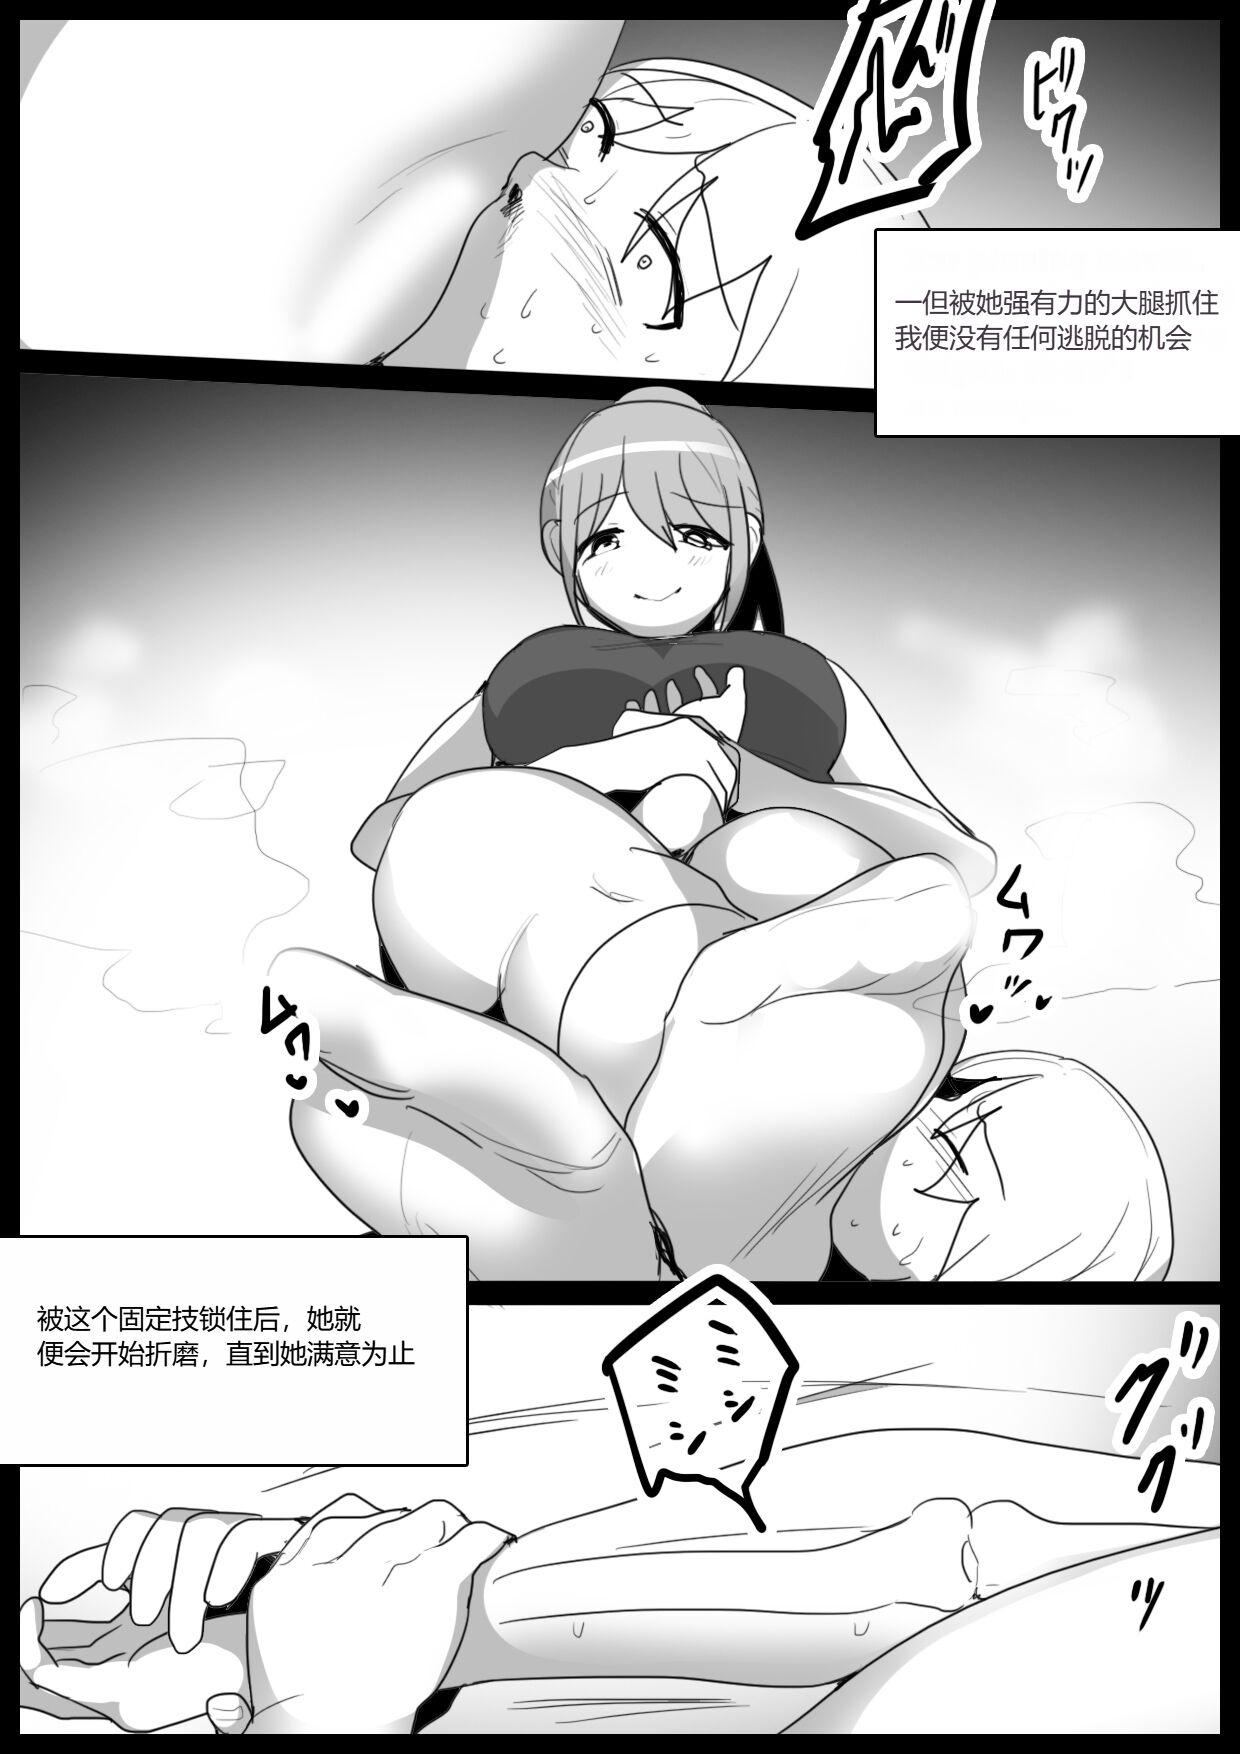 Casero Spin-Off of Girls Beat by Rie 一个人汉化 - Original Thailand - Page 10